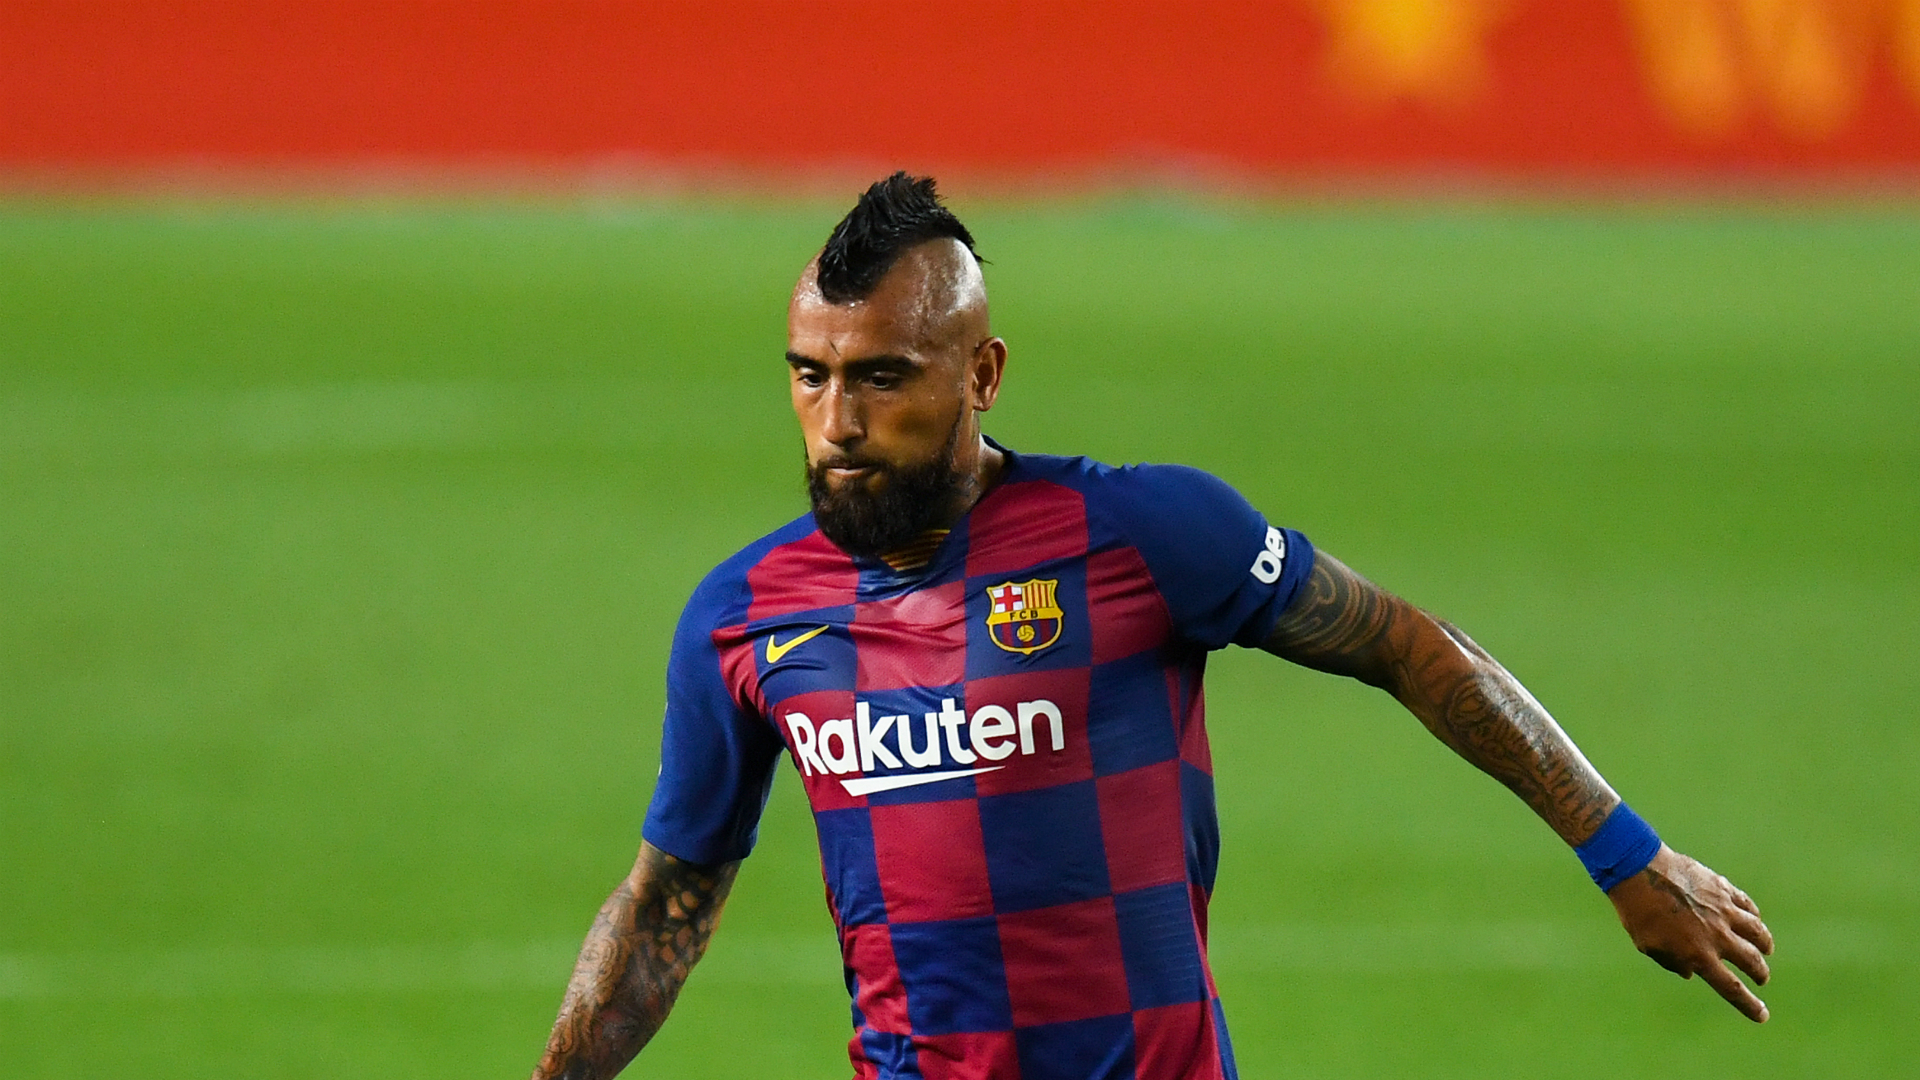 The 'Arturo Vidal case': what Barça asks for and what Inter offers